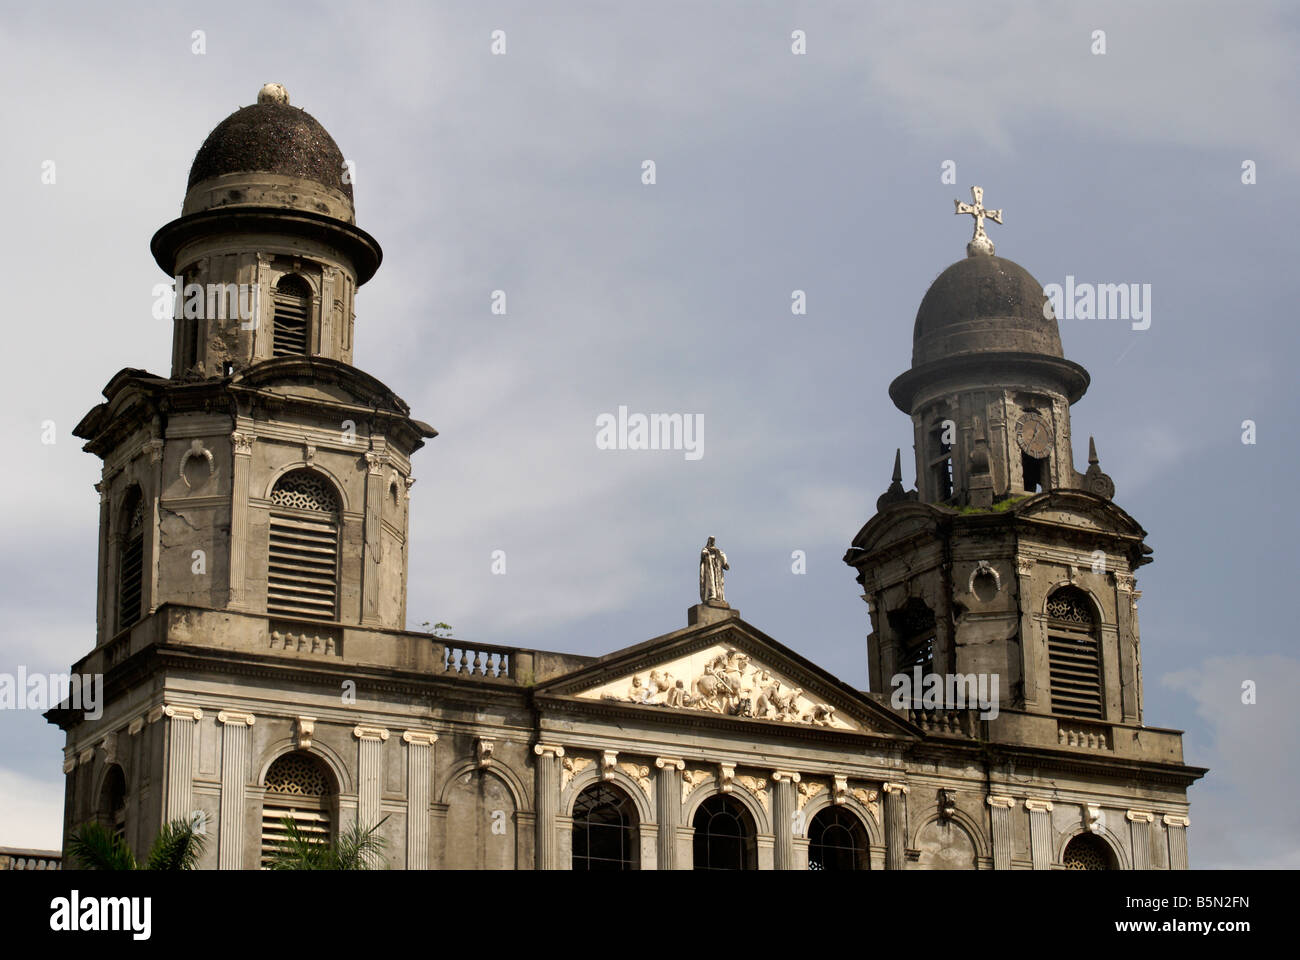 Ruins of the Old Cathedral on Plaza de la Republica in downtown Managua, Nicaragua Stock Photo